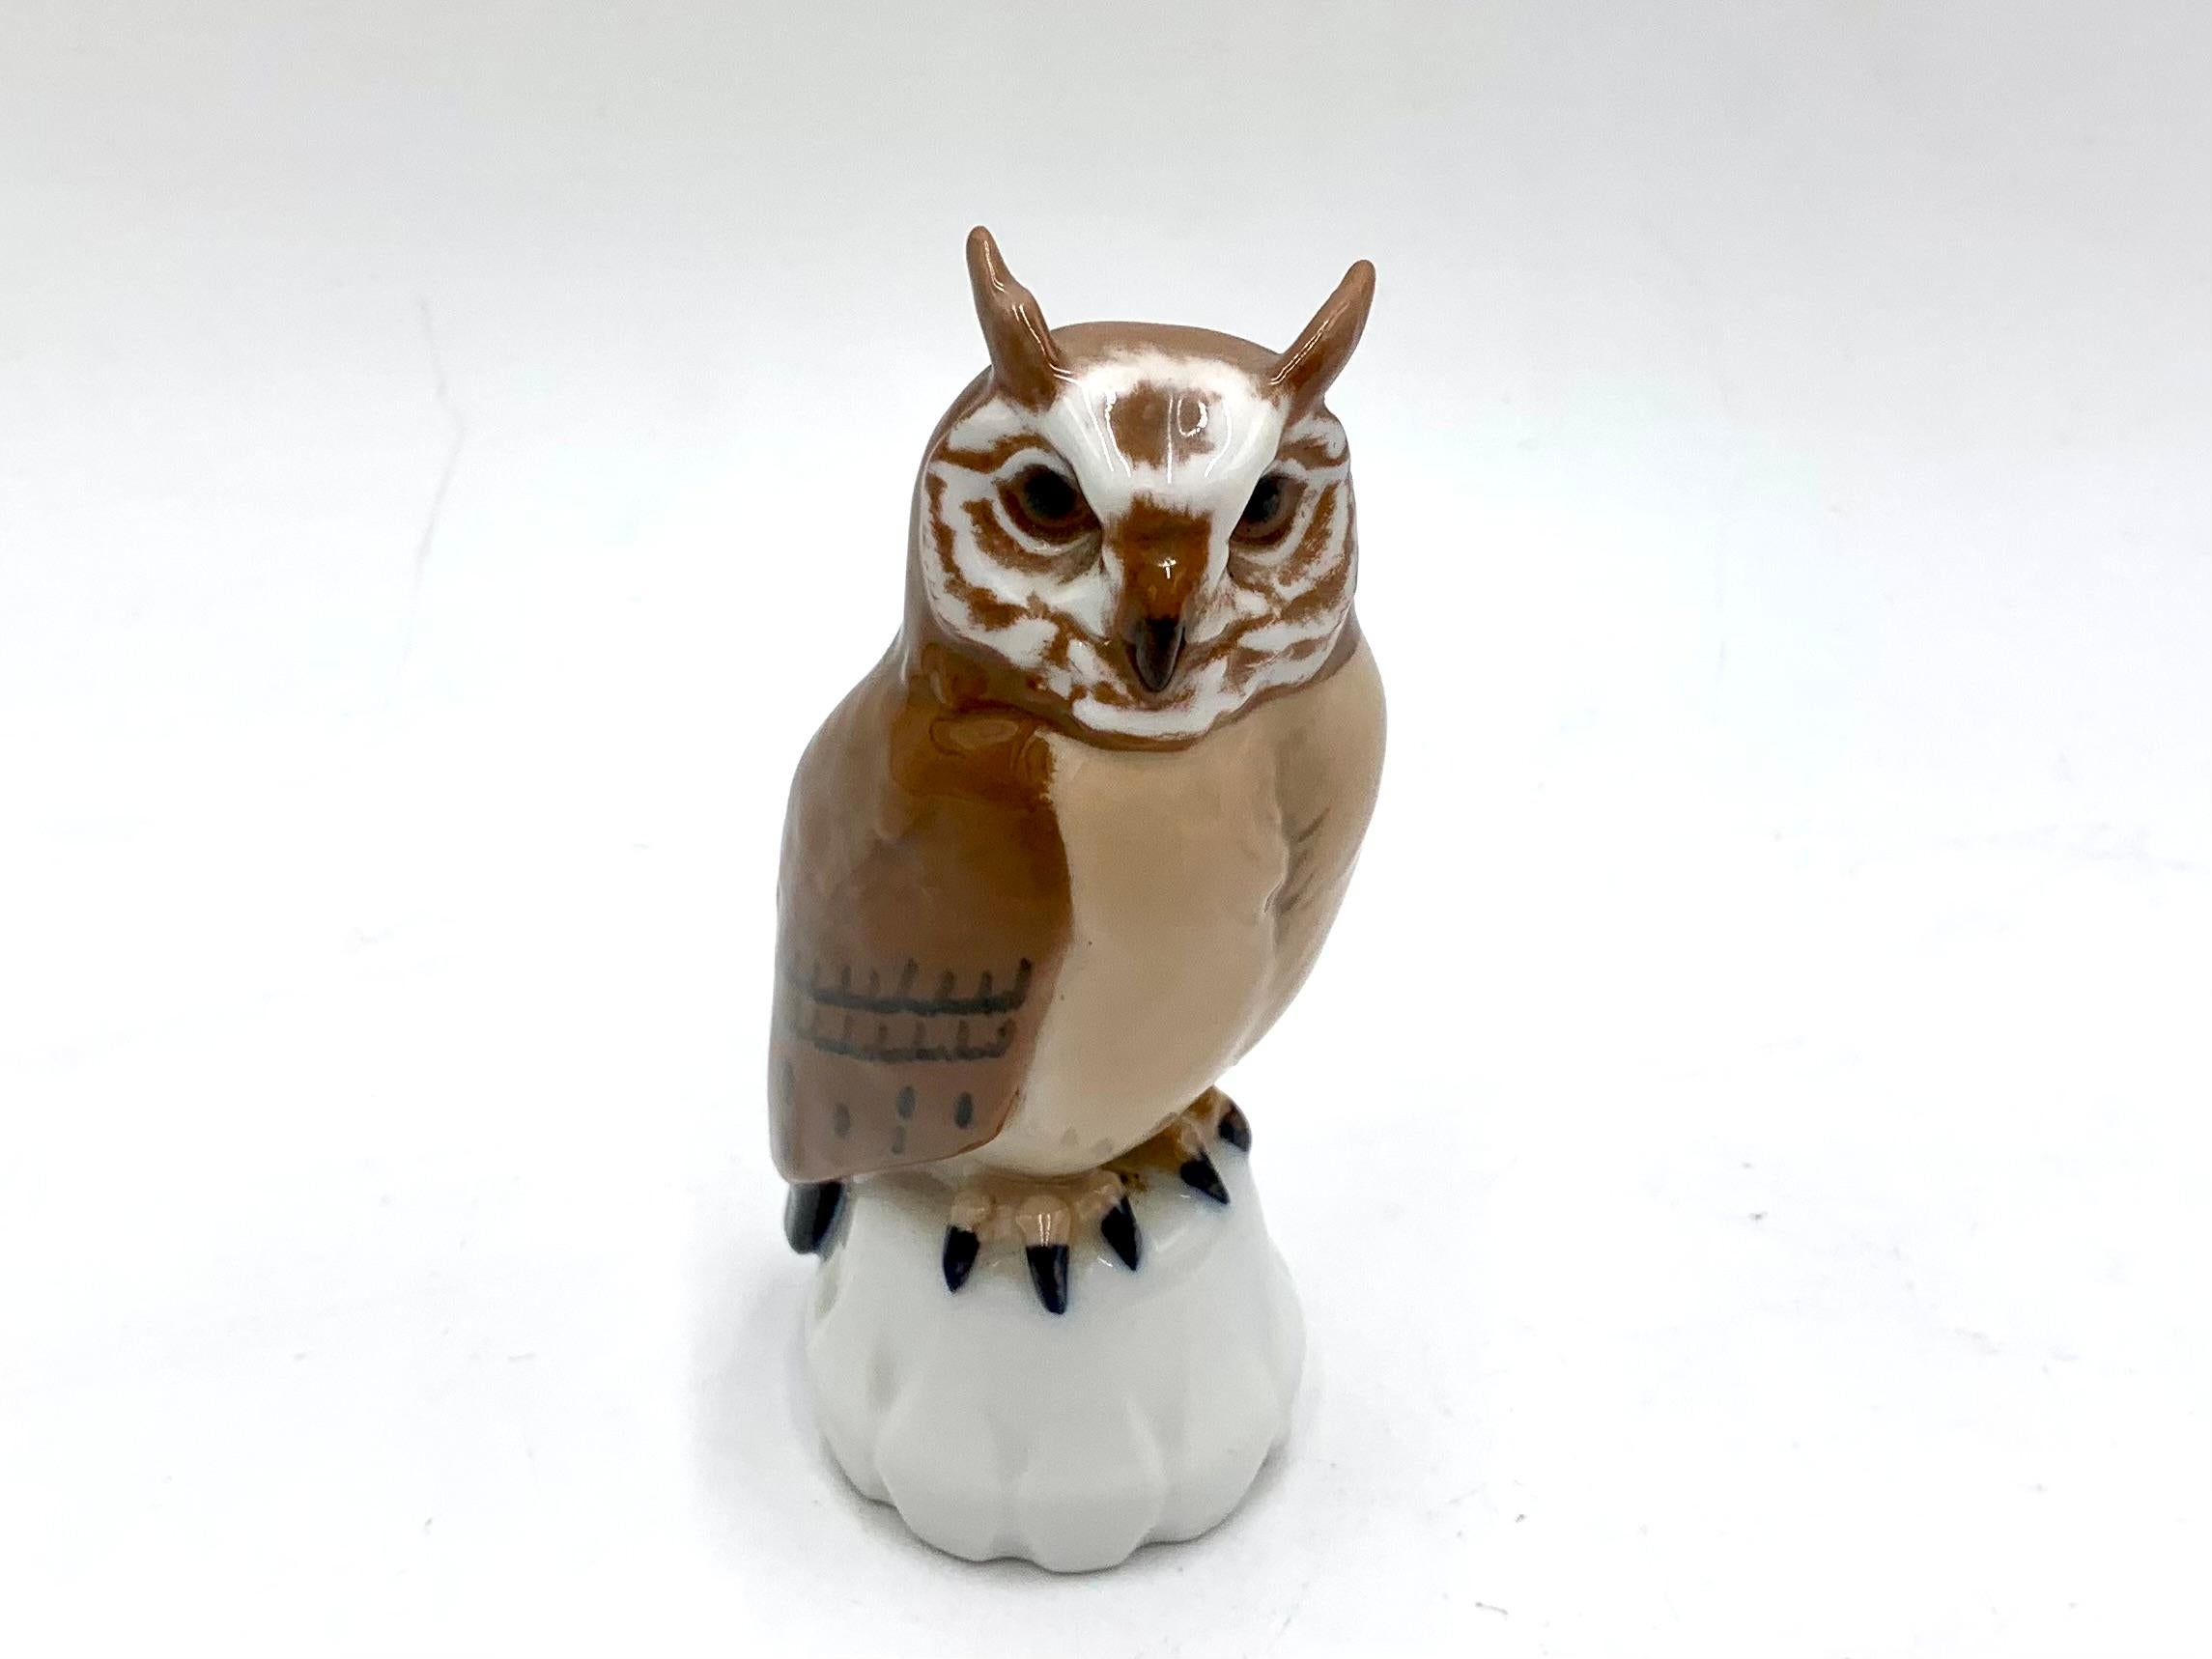 Porcelain figurine of an owl

Made in Denmark by Bing & Grondahl

Produced in 1970-1983

Model number # 1800

Very good condition, no damage.

Measures: height 11.5 cm, width 6 cm, depth 6 cm.